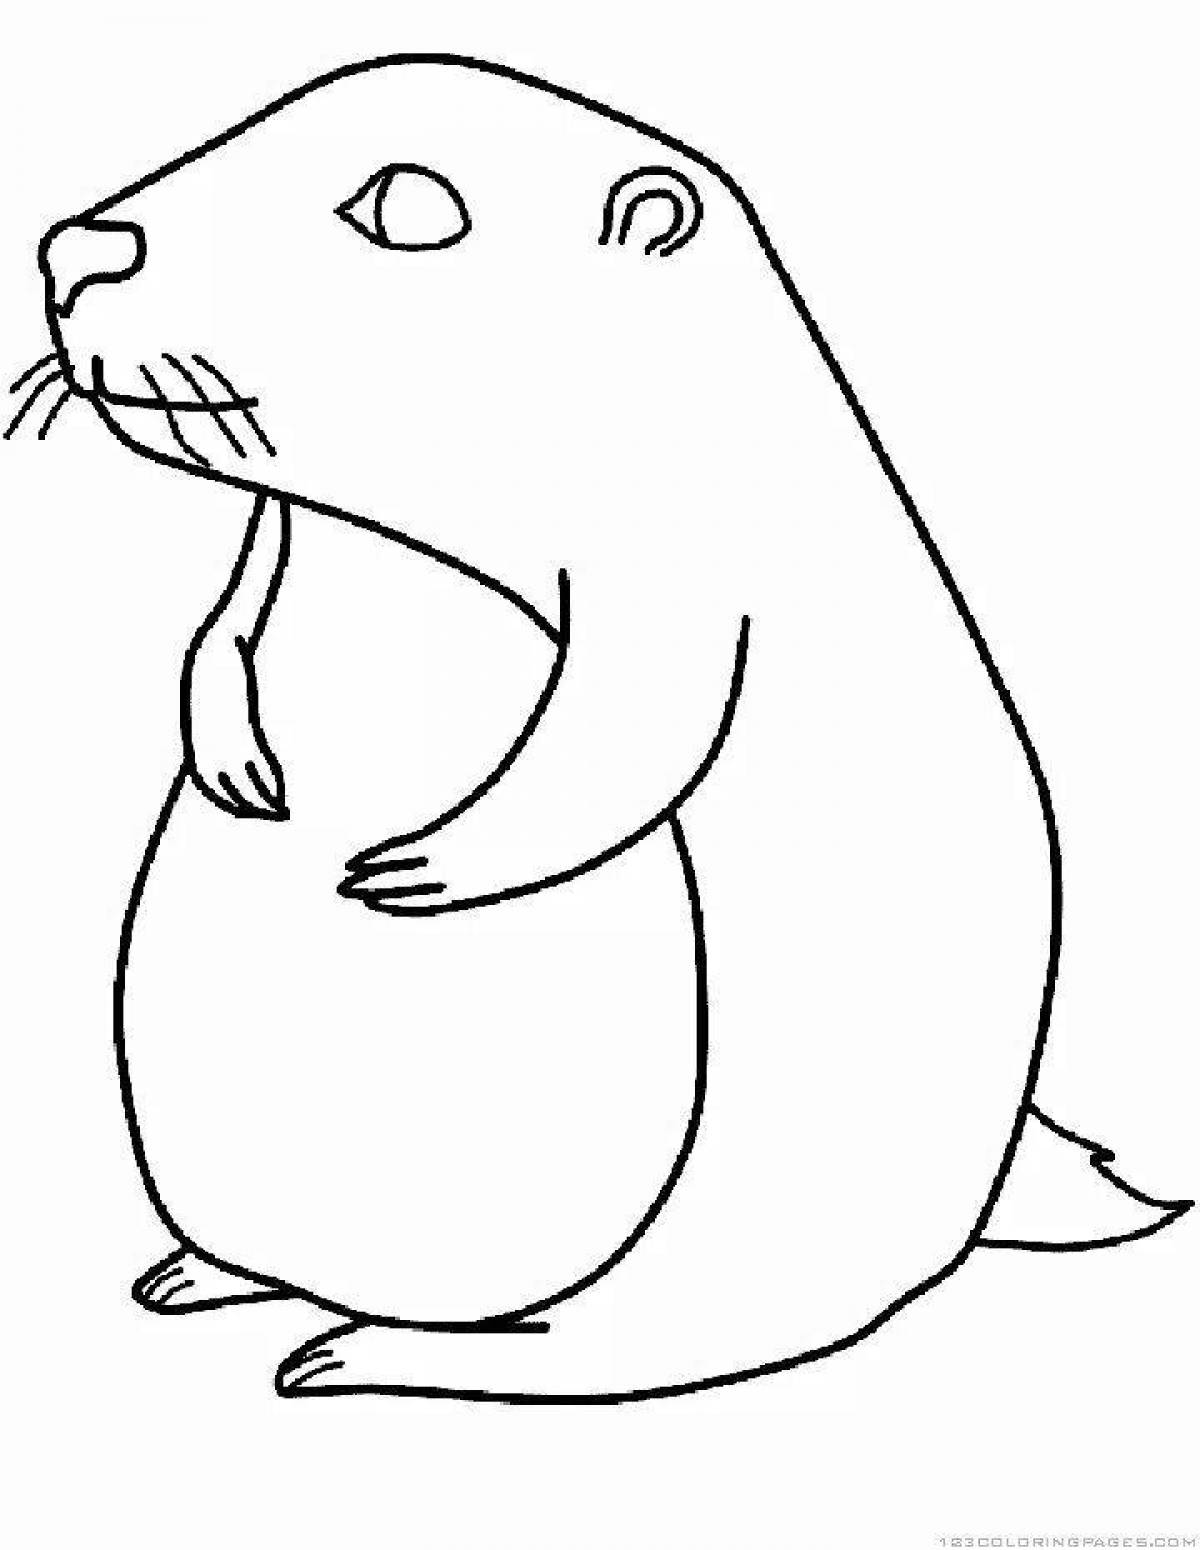 Coloring page playful marmot